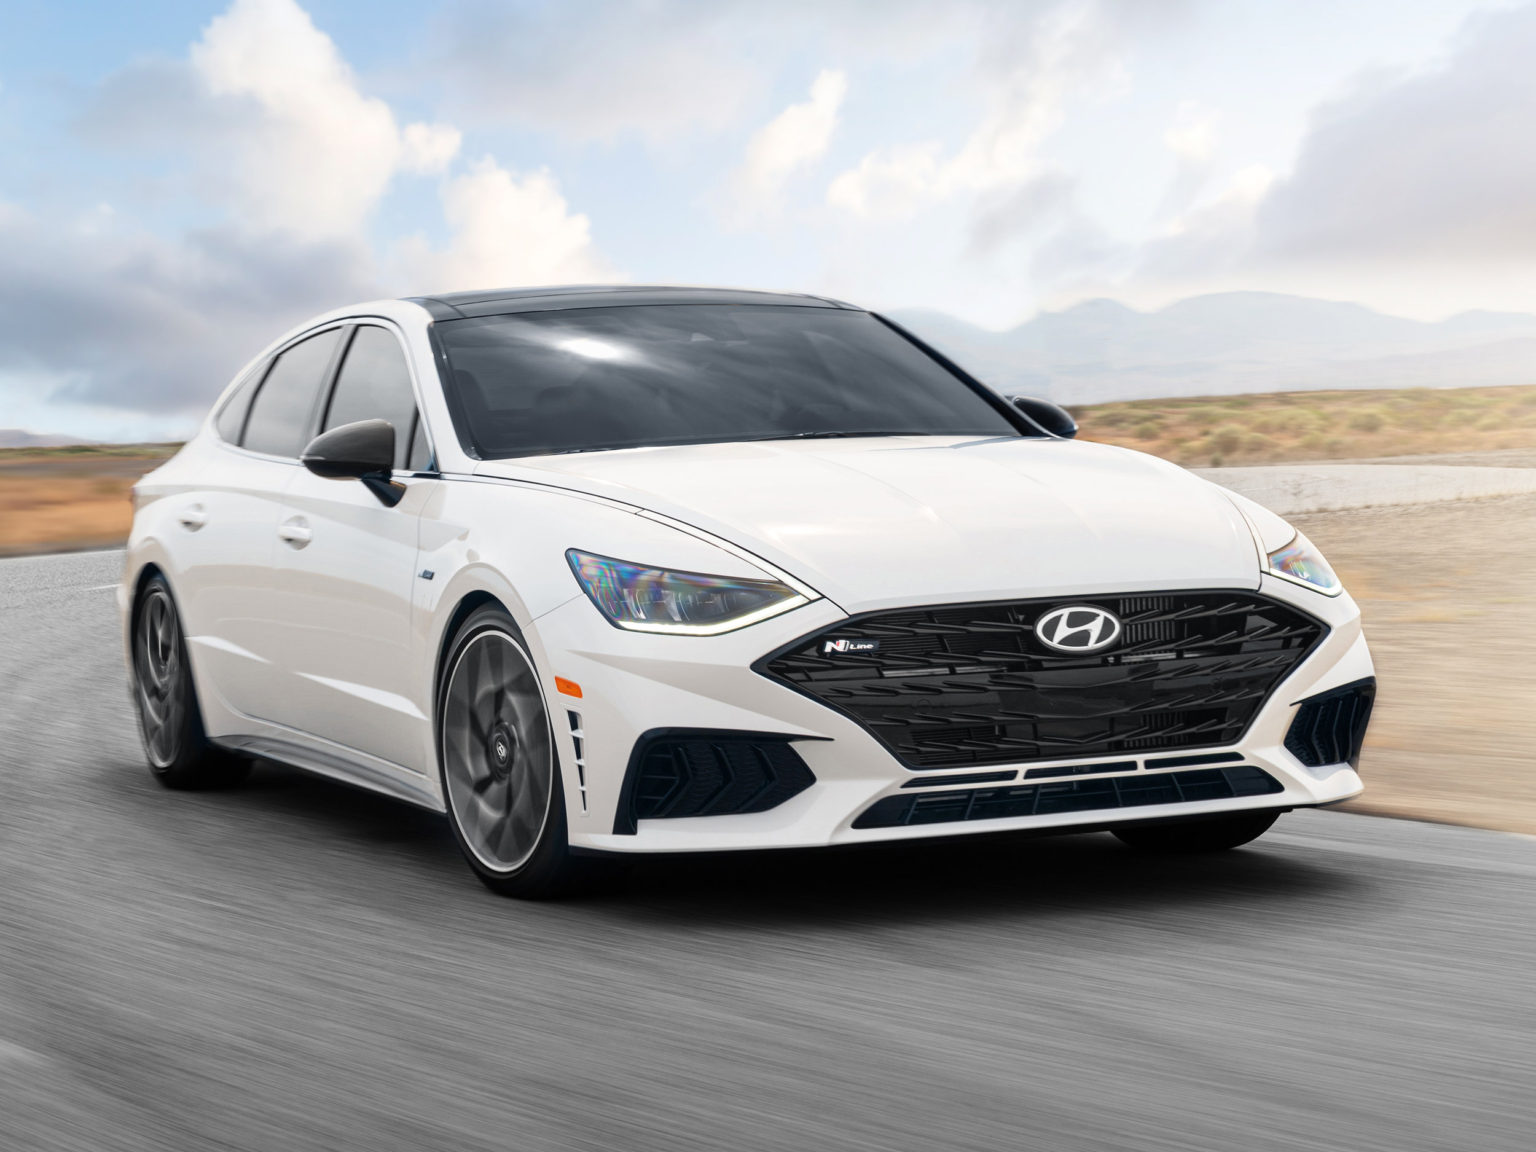 The 2021 Hyundai Sonata N Line is meant as a sporty daily driver.